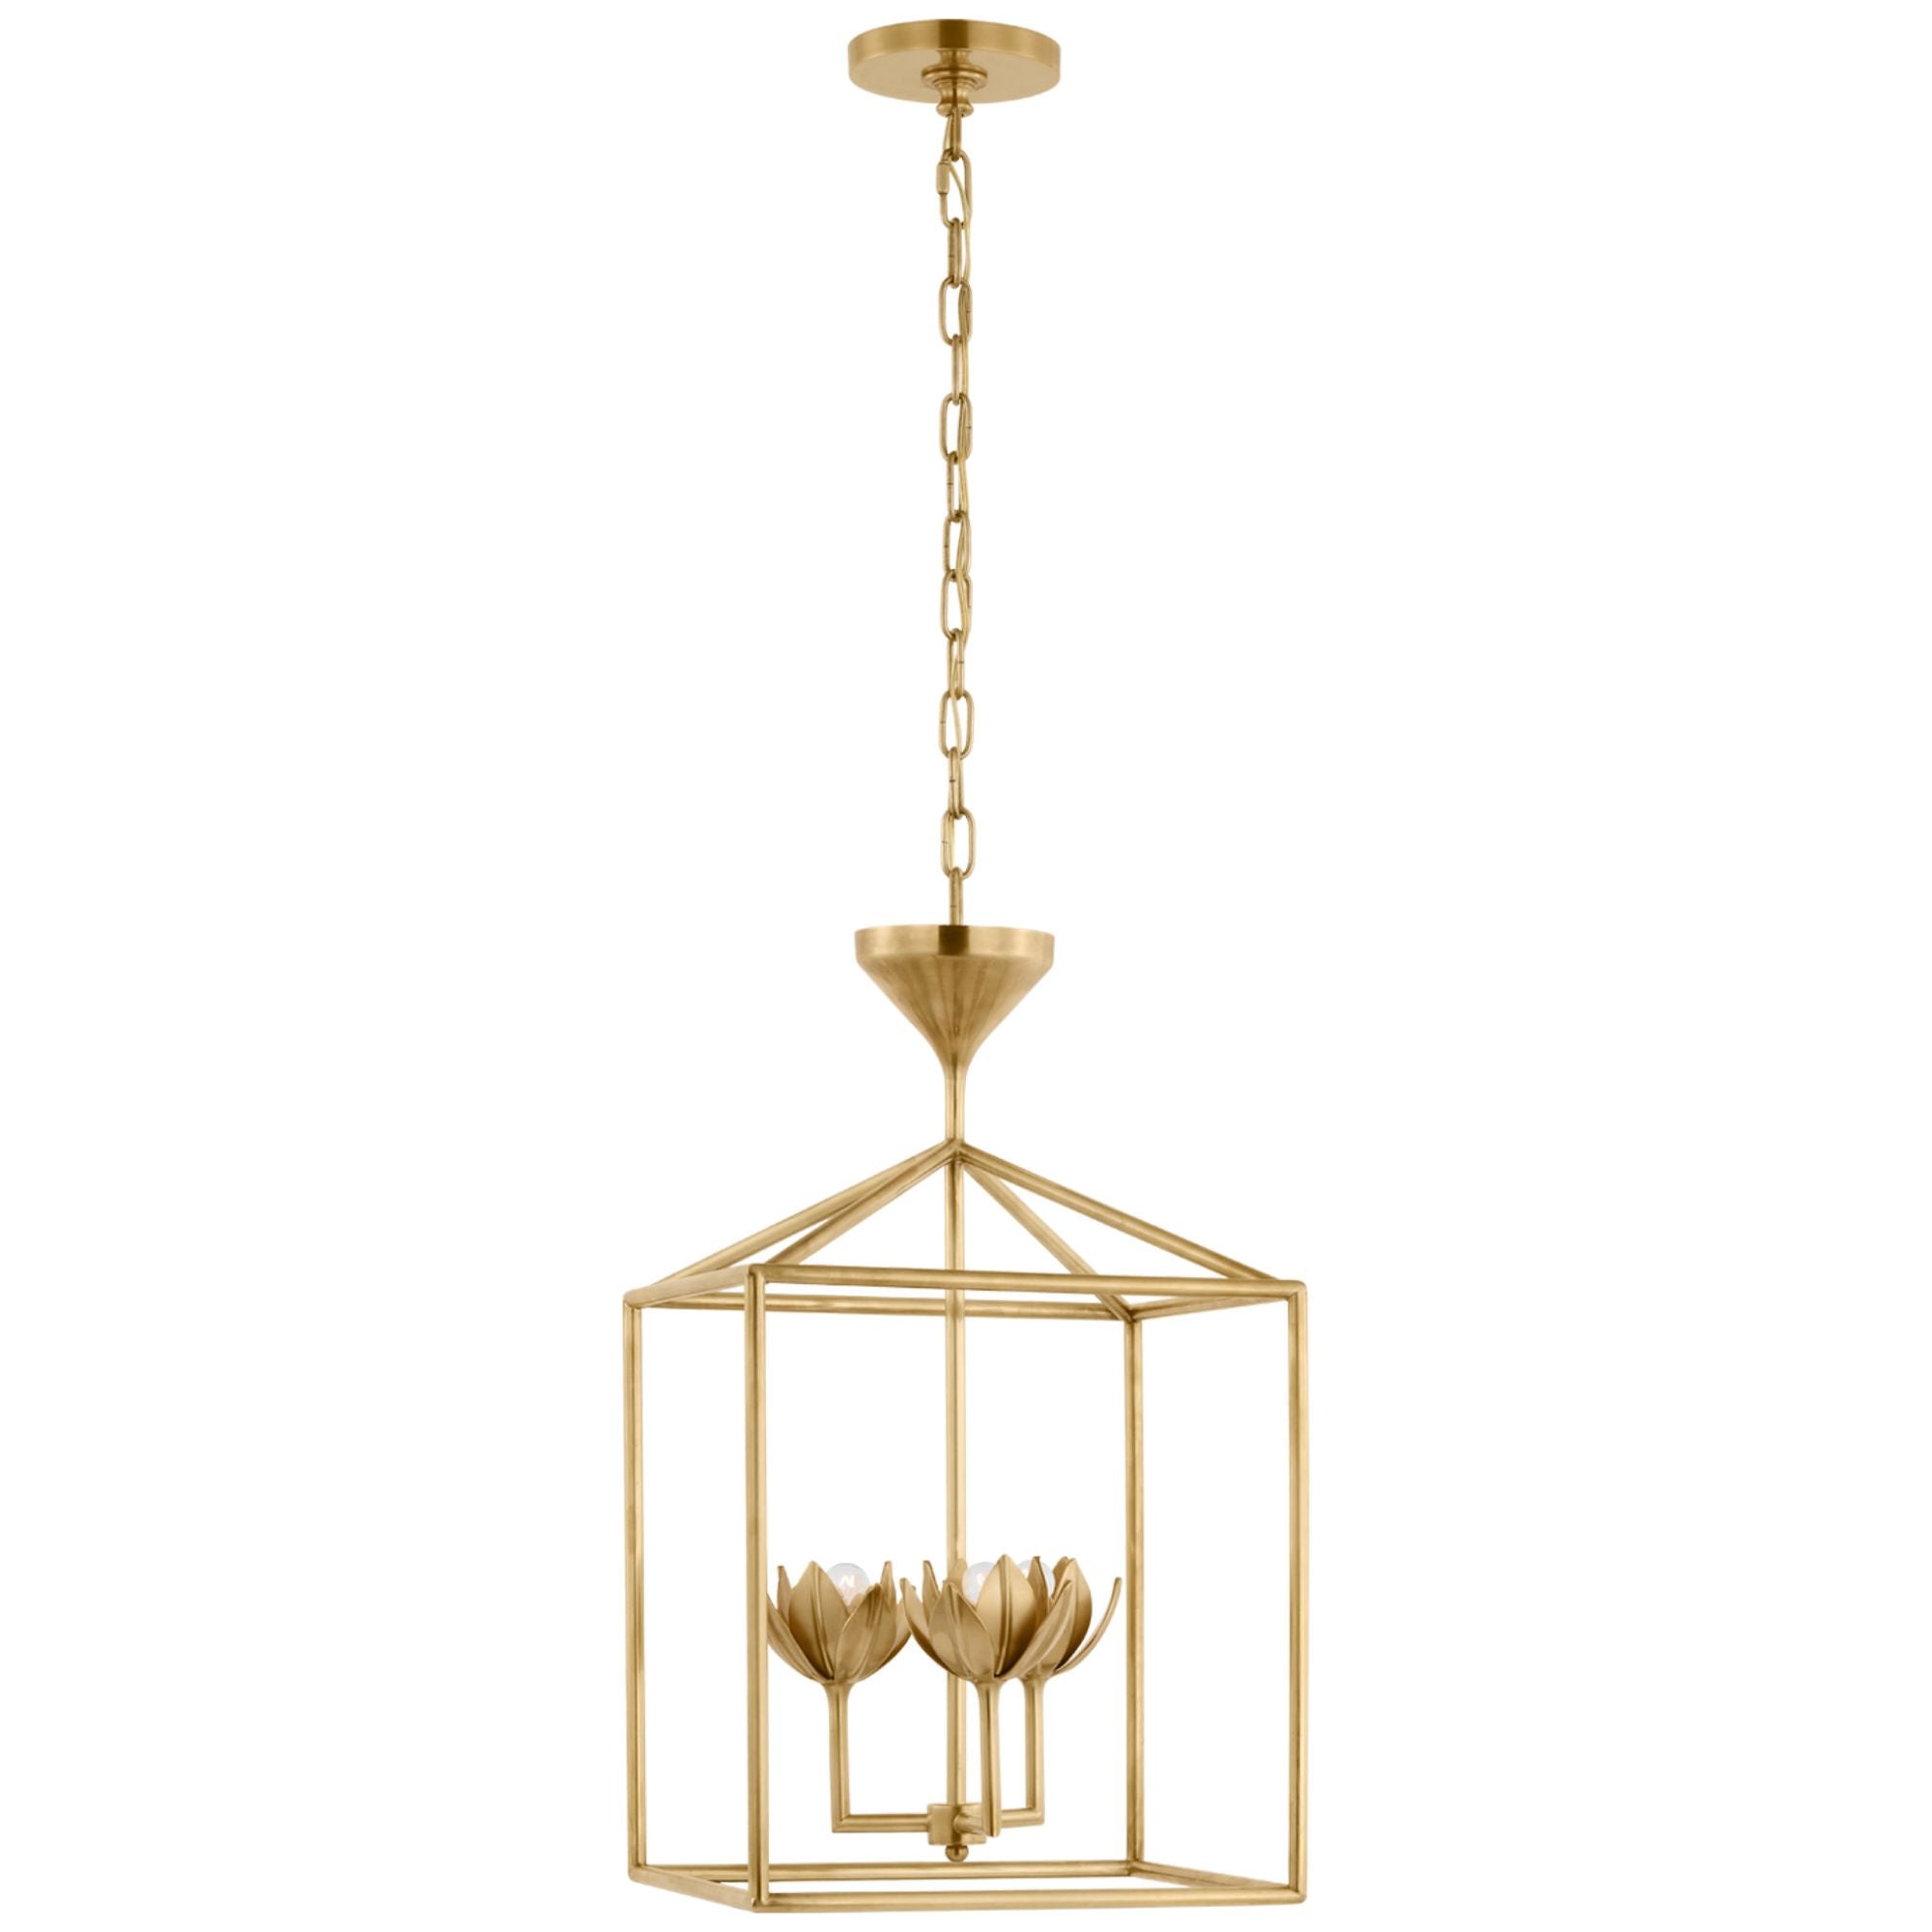 Julie Neill Alberto Small Open Cage Lantern in Antique-Burnished Brass